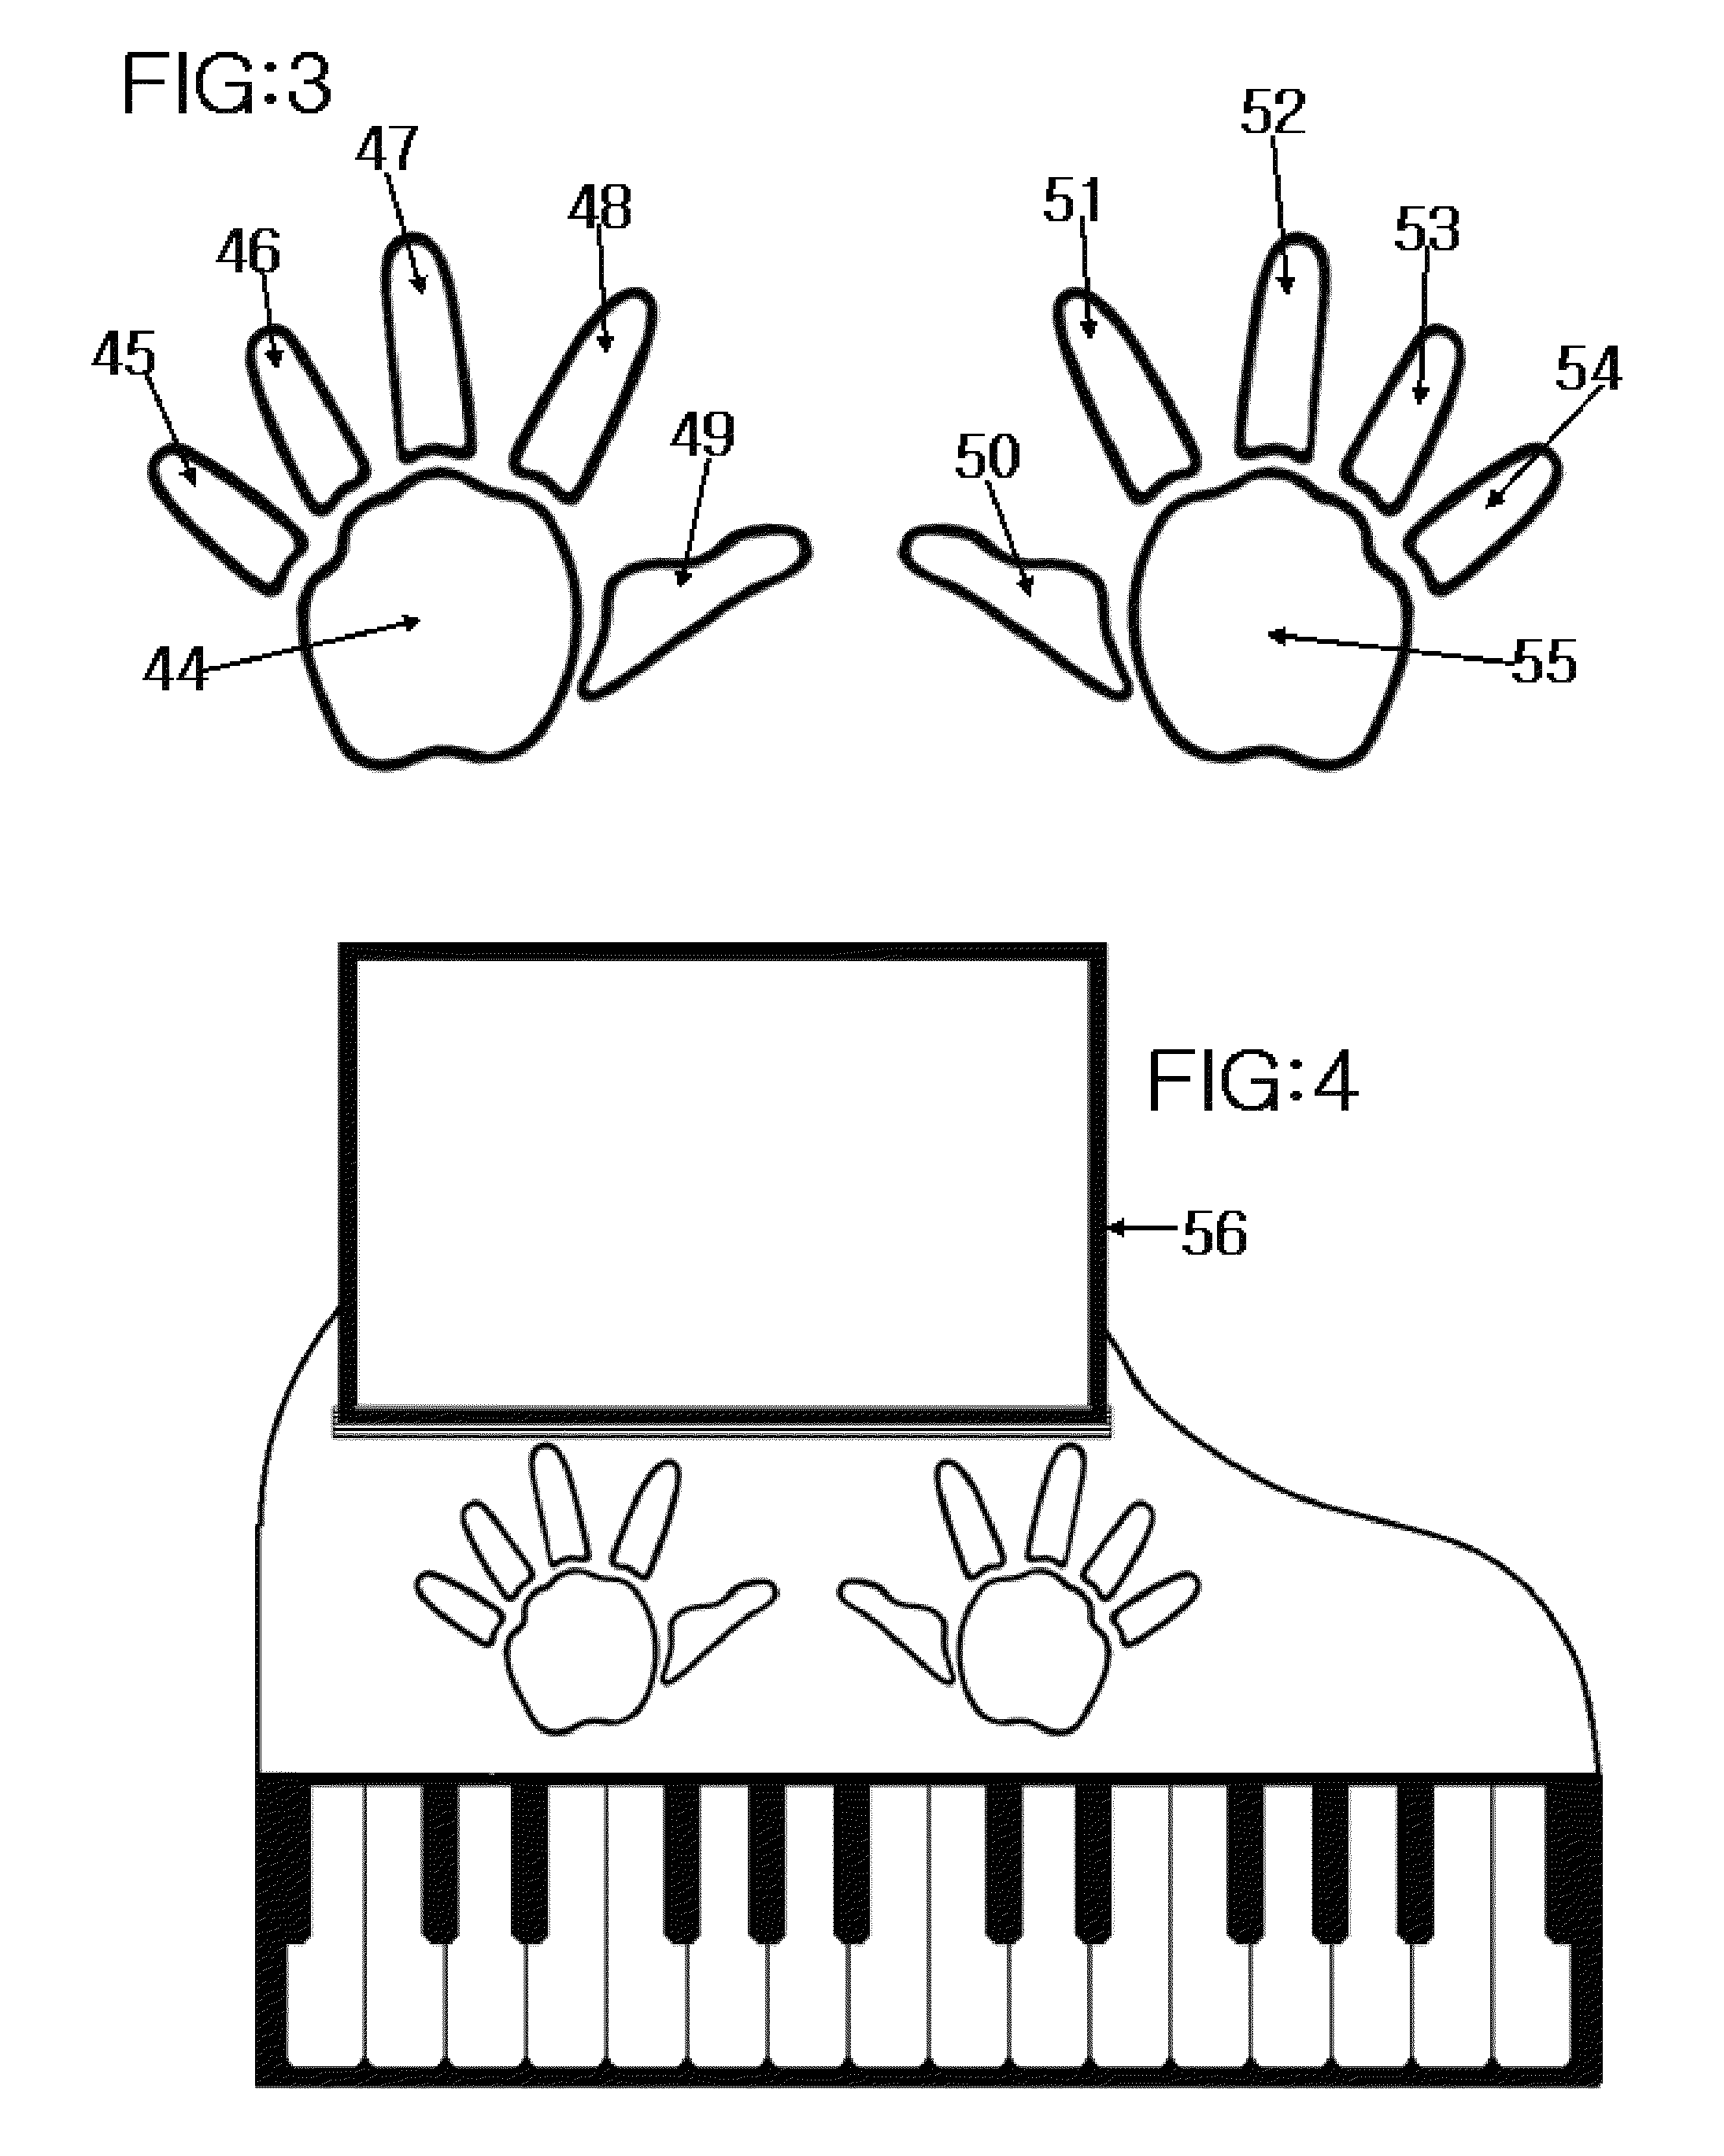 Electronic circuit driven, inter-active, plural sensory stimuli apparatus and comprehensive method to teach, with no instructor present, beginners as young as two years old to play a piano/keyboard type musical instrument and to read and correctly respond to standard music notation for said instruments